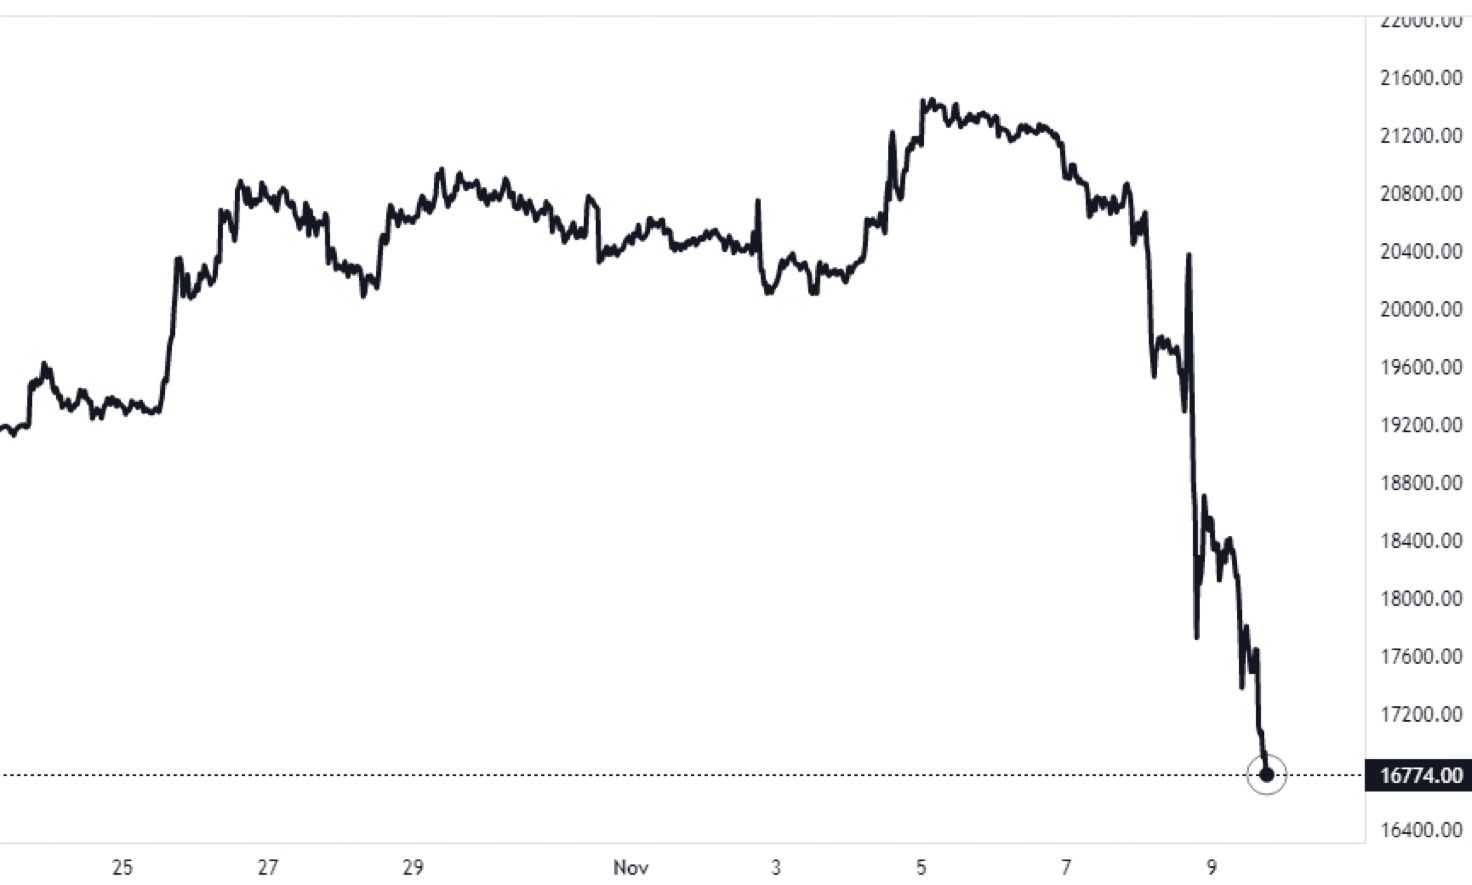 Bitcoin has crashed on fears of the potential bankruptcy of the FTX crypto exchange